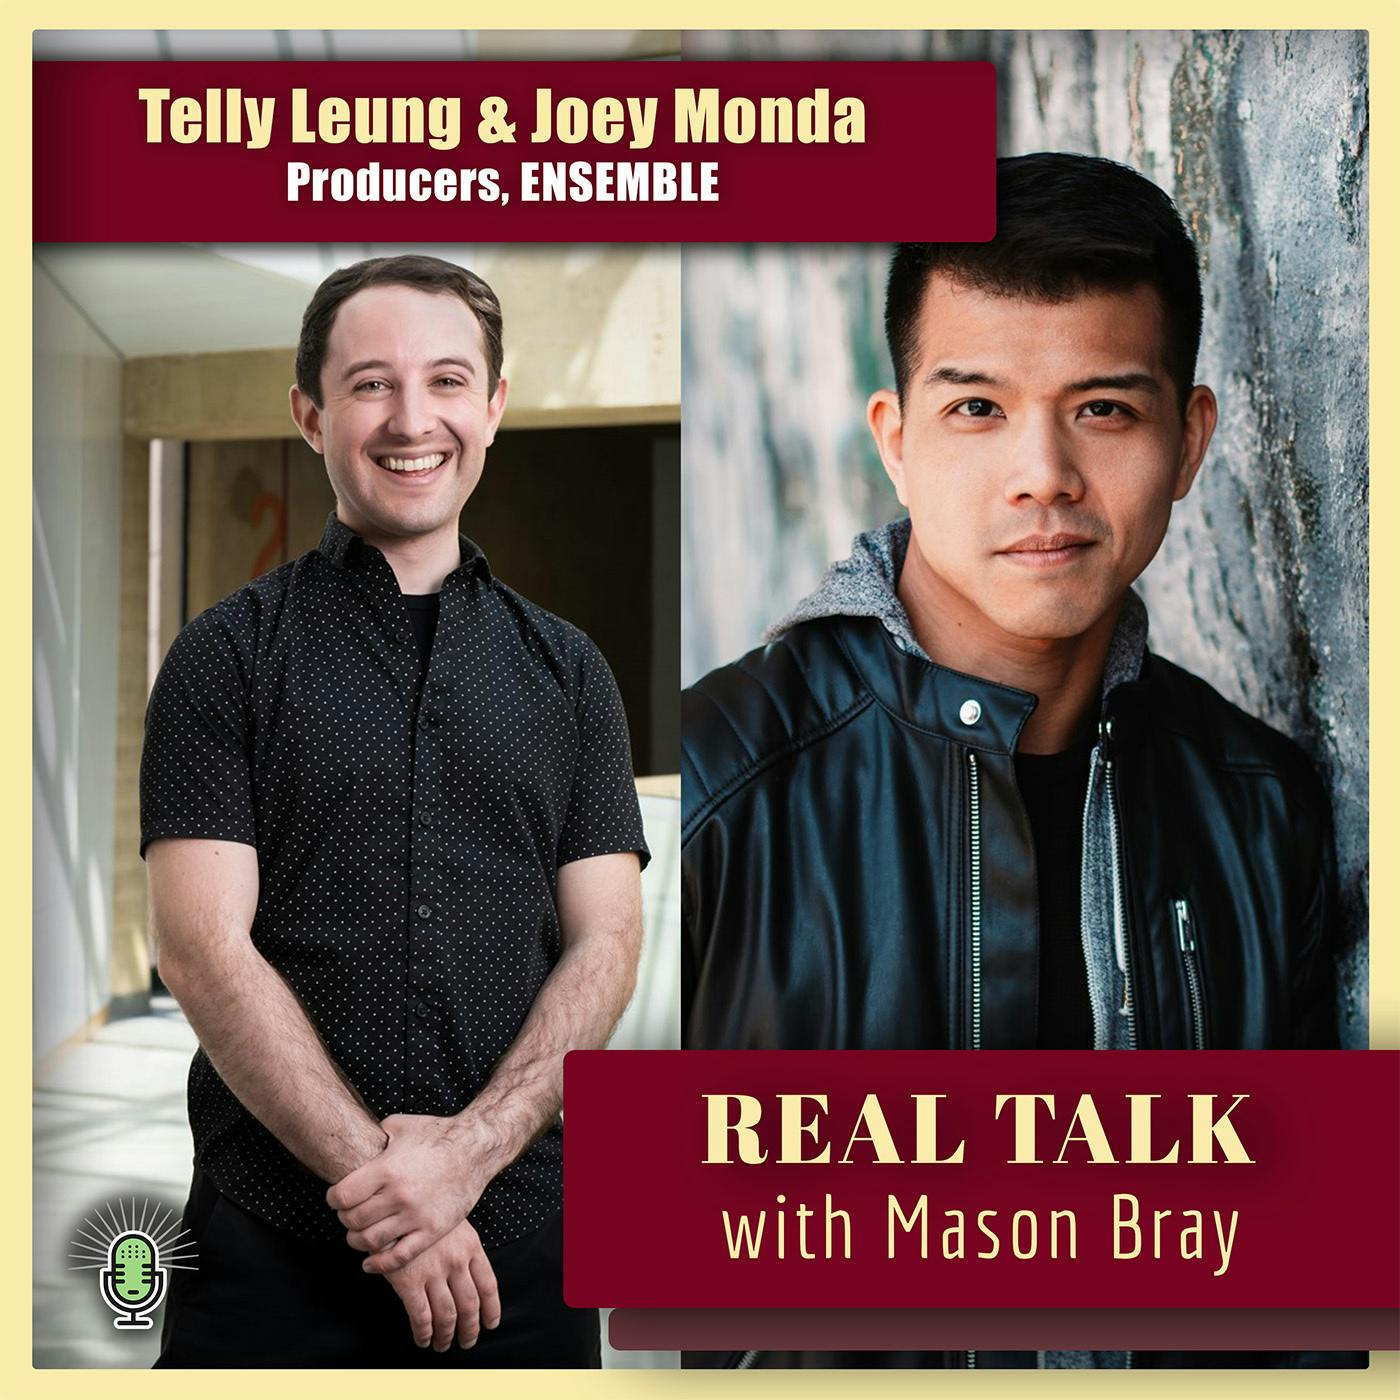 Ep. 53 - BROADWAY TALKS with Executive Producers from "ENSEMBLE" - Telly Leung & Joey Monda